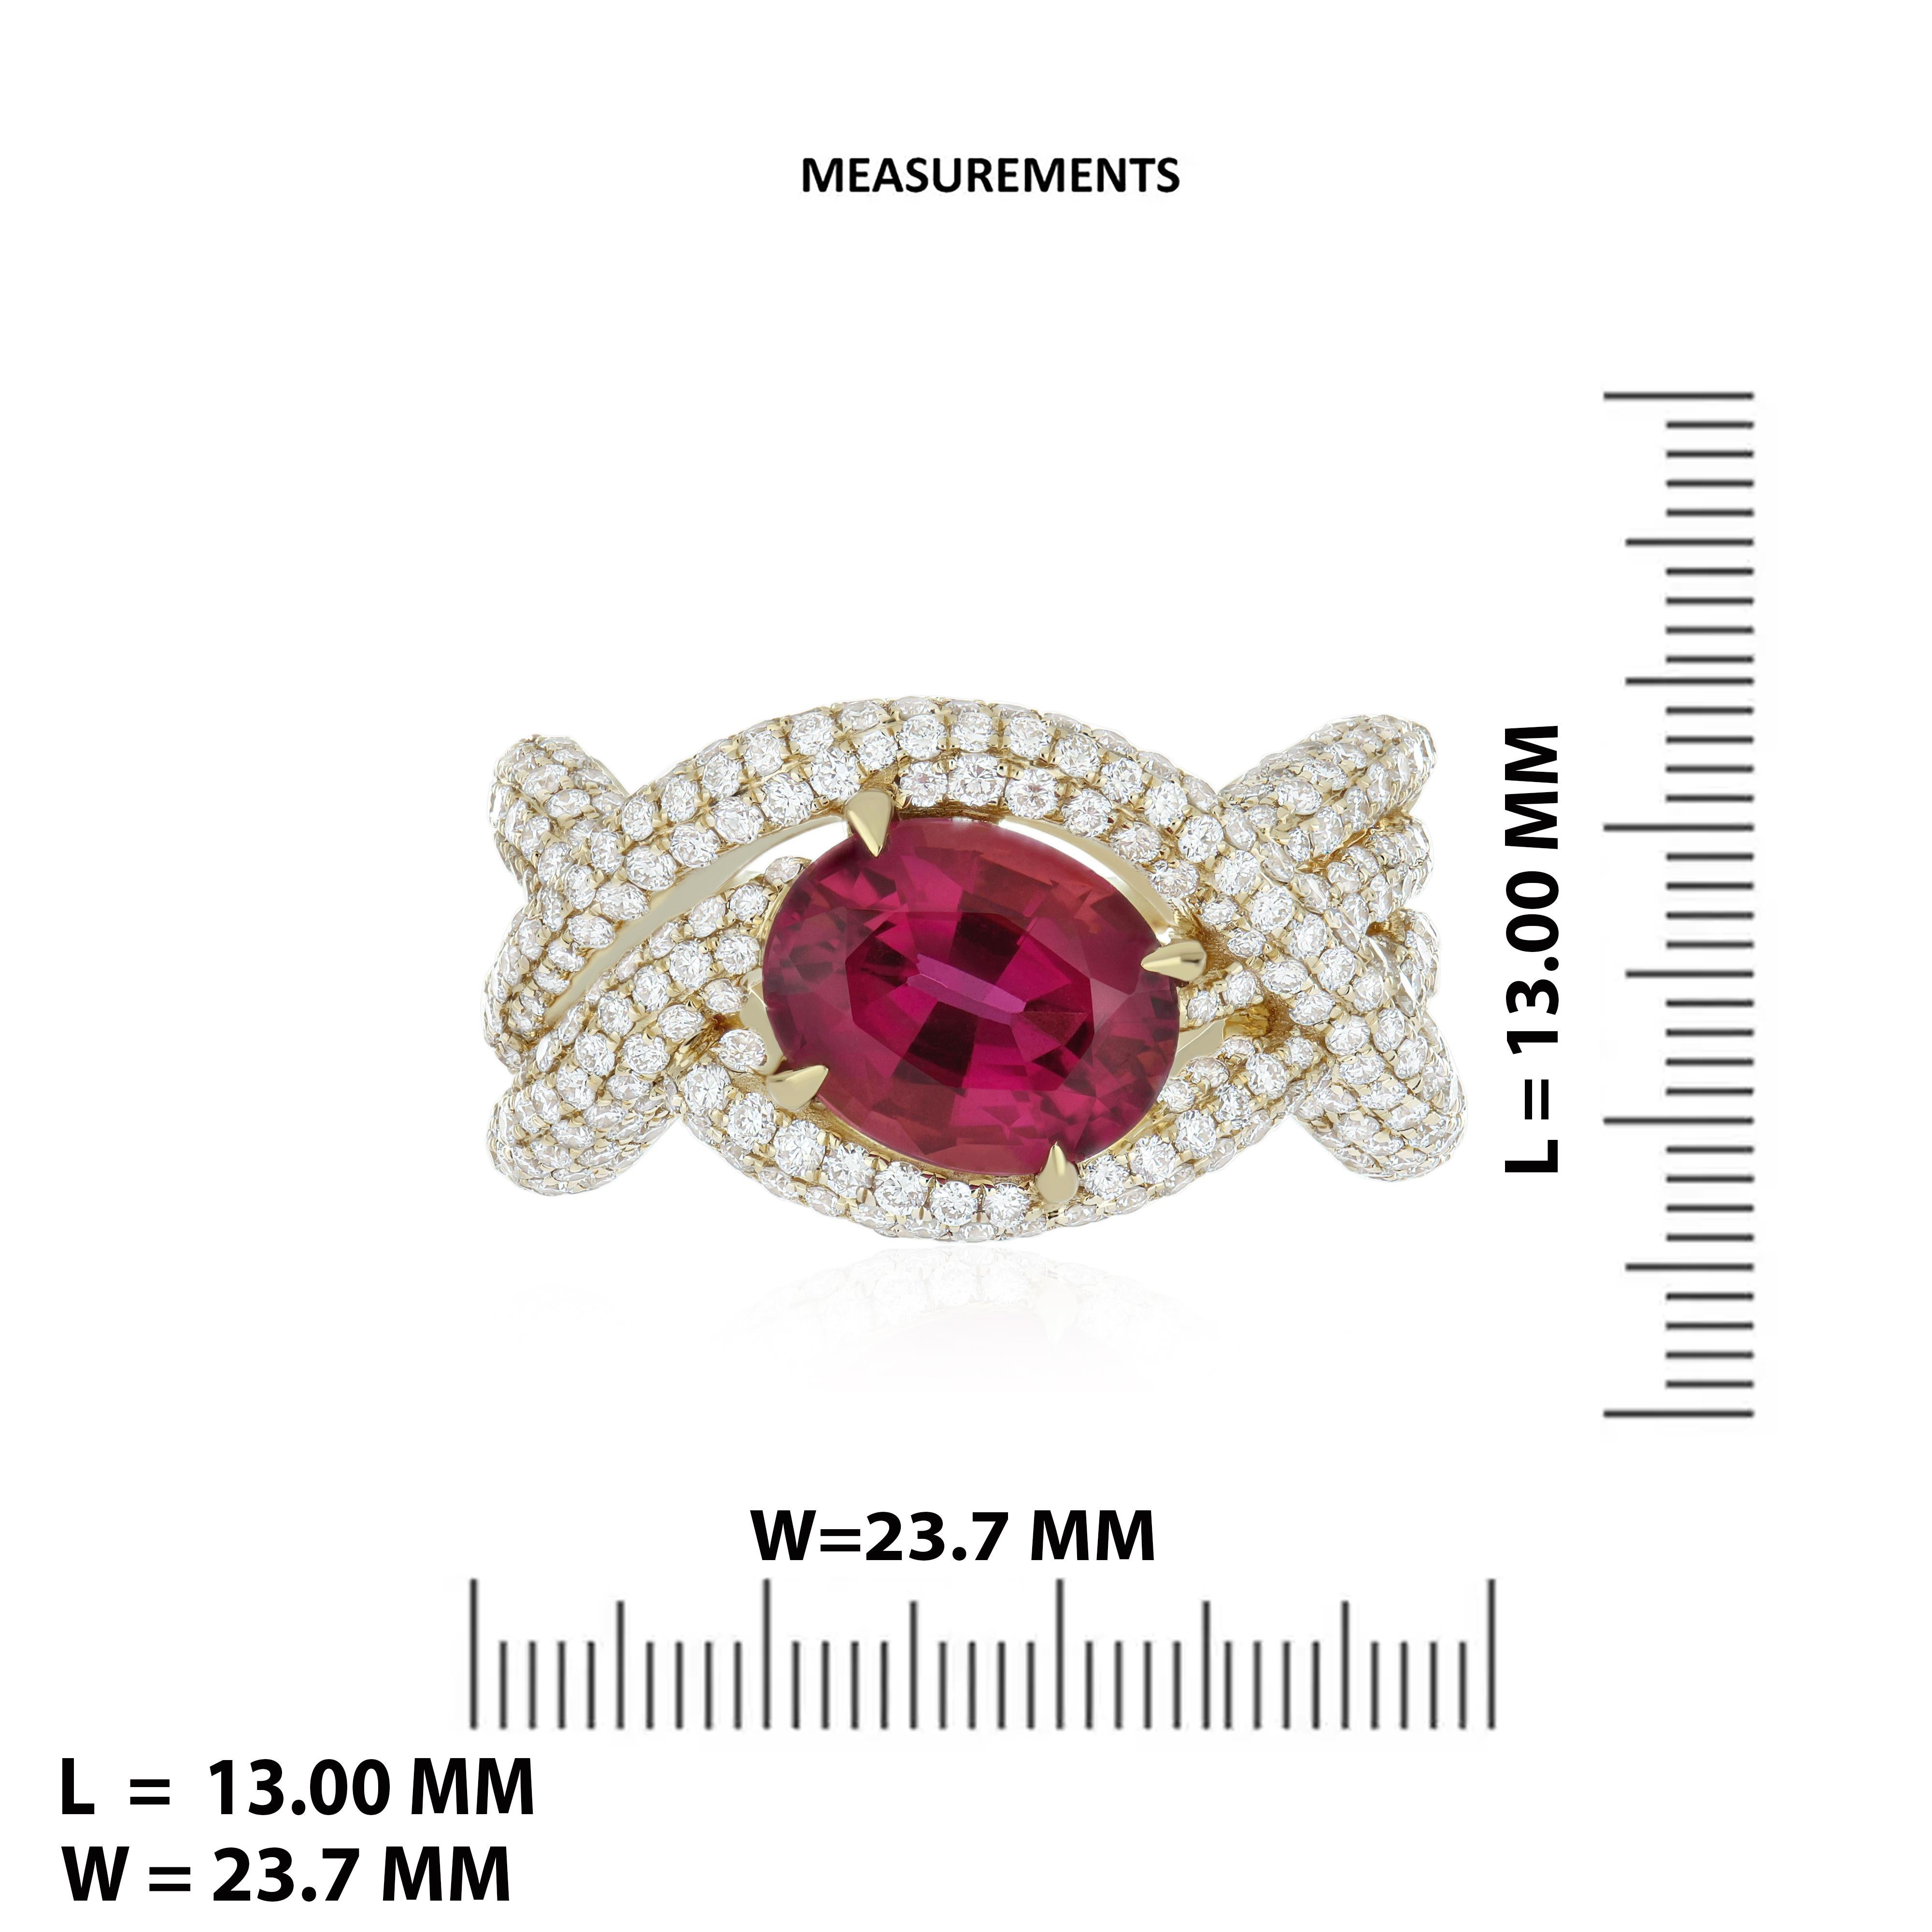 Women's 2.85 CT's Rubellite & Diamond Ring in 18 karat Yellow Gold Hand-crafted Ring For Sale